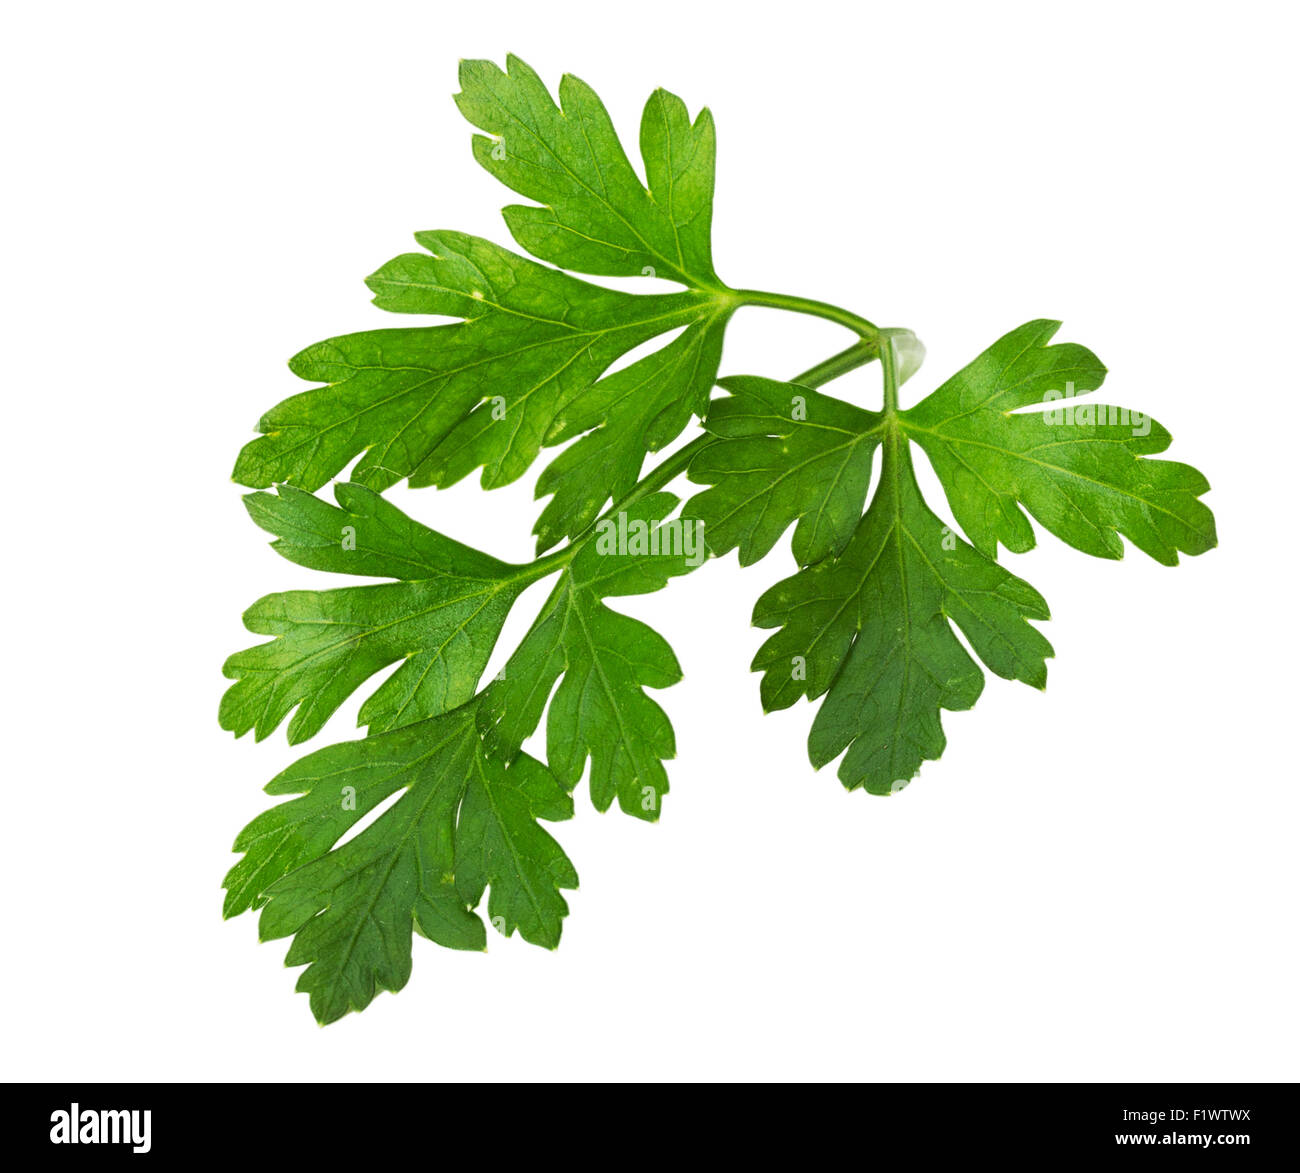 Chopping Parsley As a Garnish Stock Image - Image of stainless, leaves:  29712743